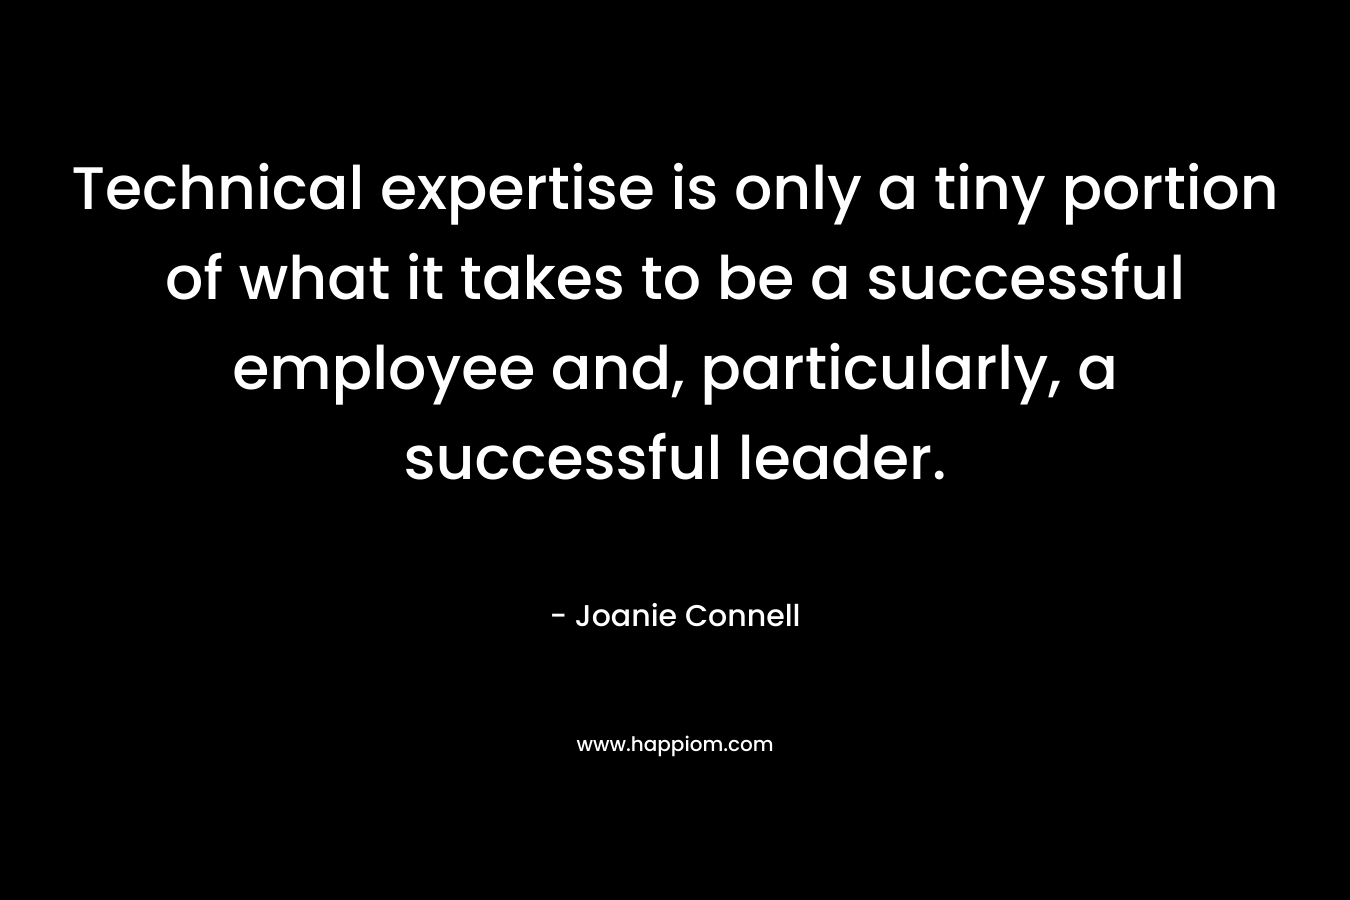 Technical expertise is only a tiny portion of what it takes to be a successful employee and, particularly, a successful leader.